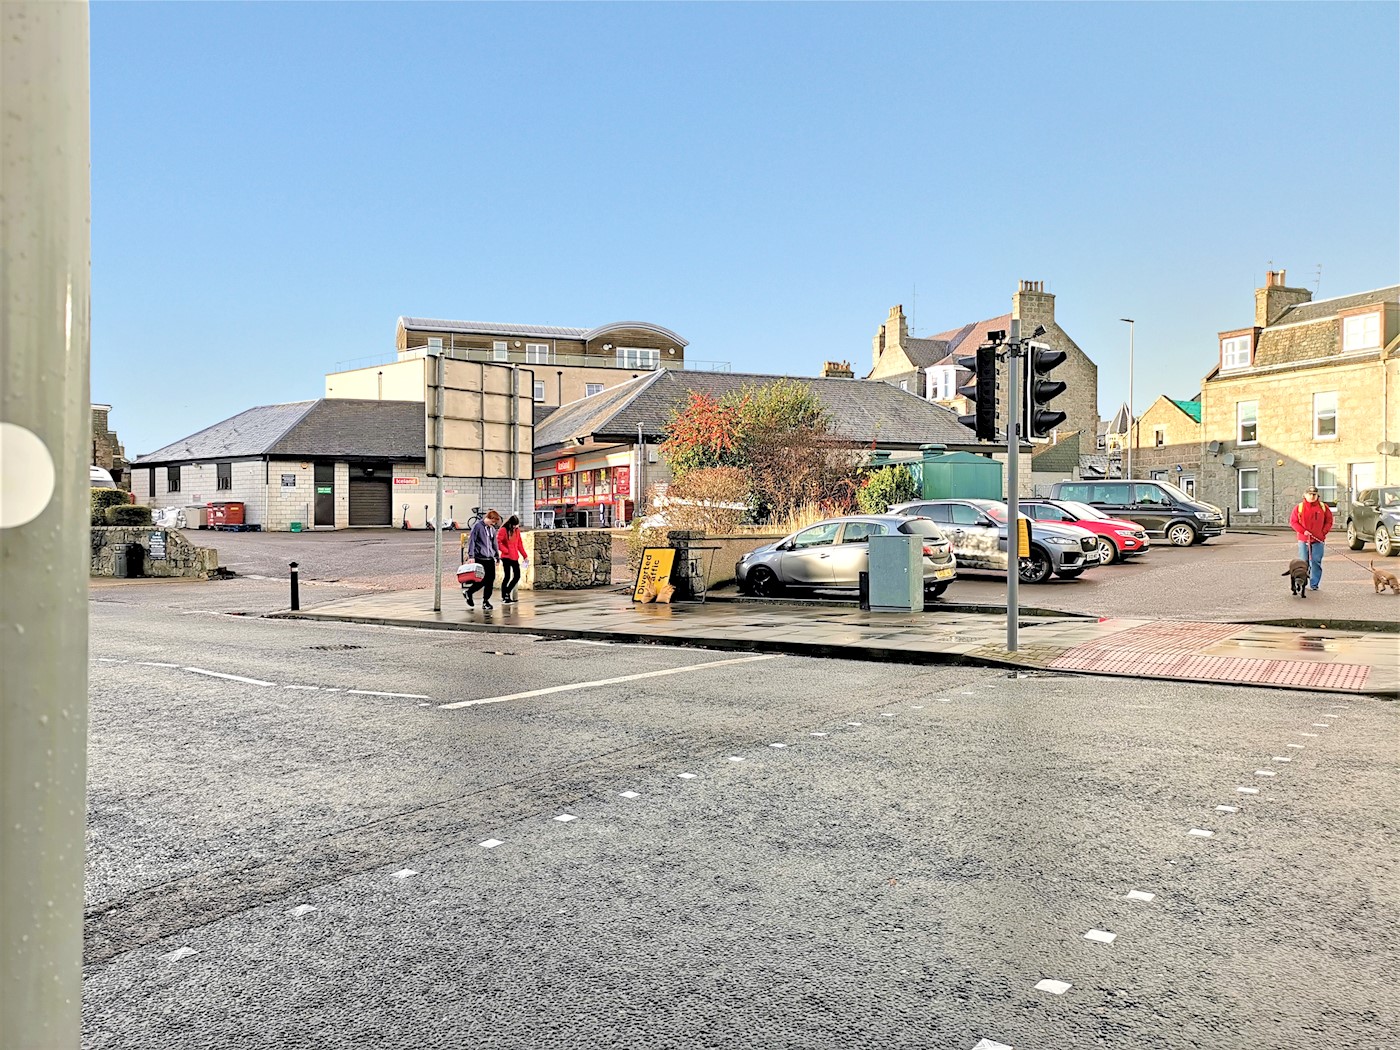 Two strips of land at Holburn Street/Broomhill Road, Aberdeen, AB10 7FP 1/5